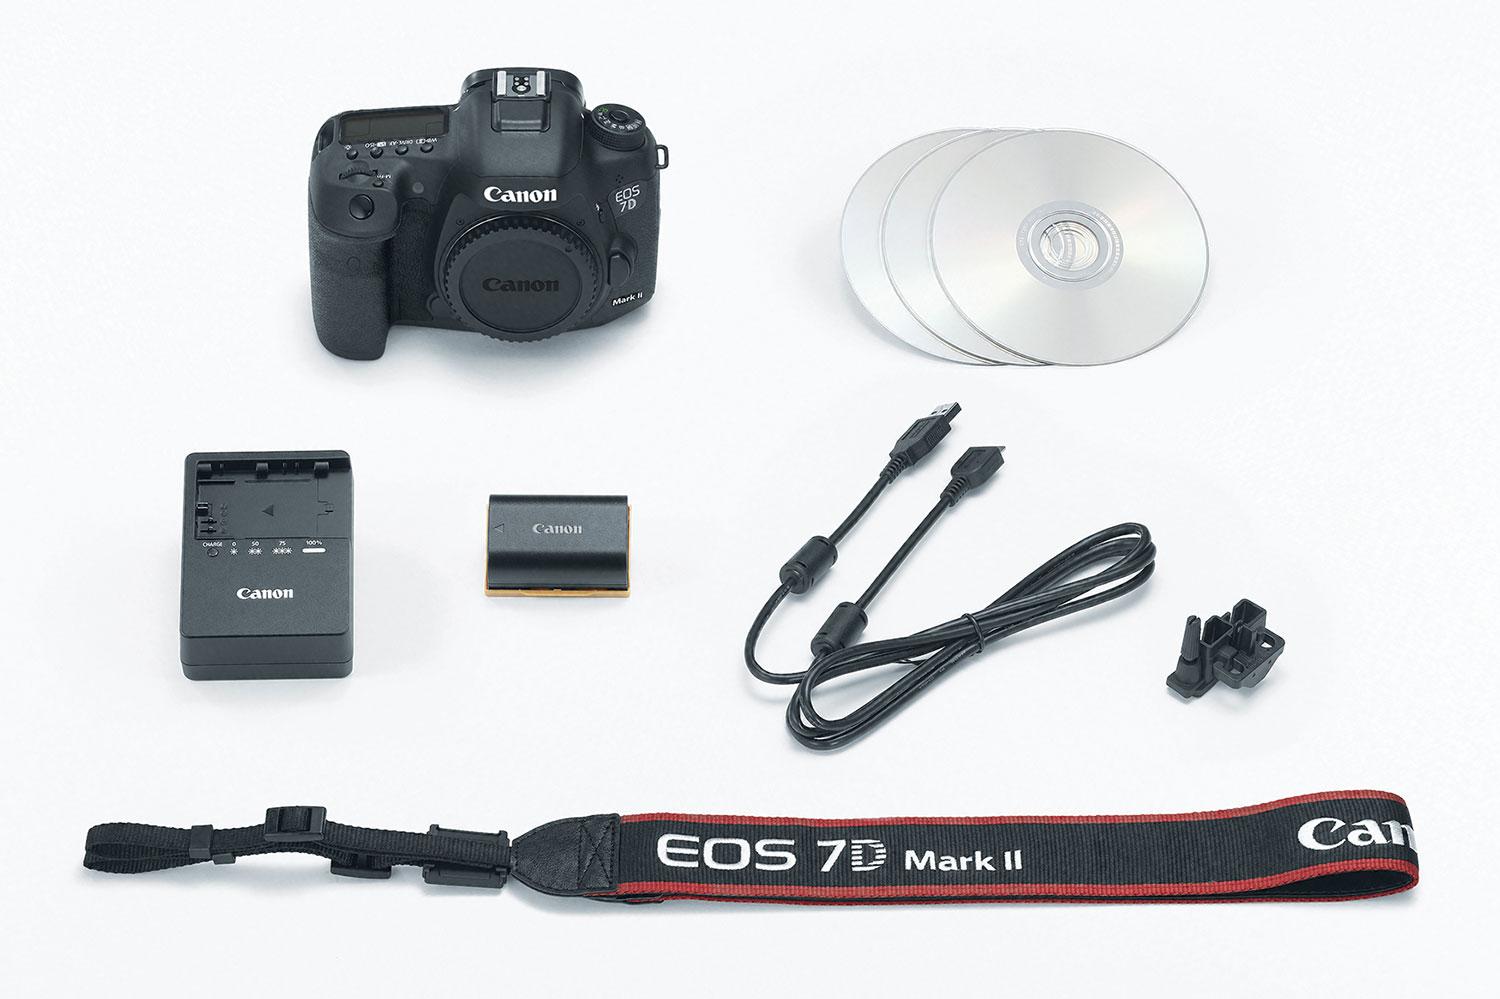 hands on review canon eos 7d mark ii kit press image